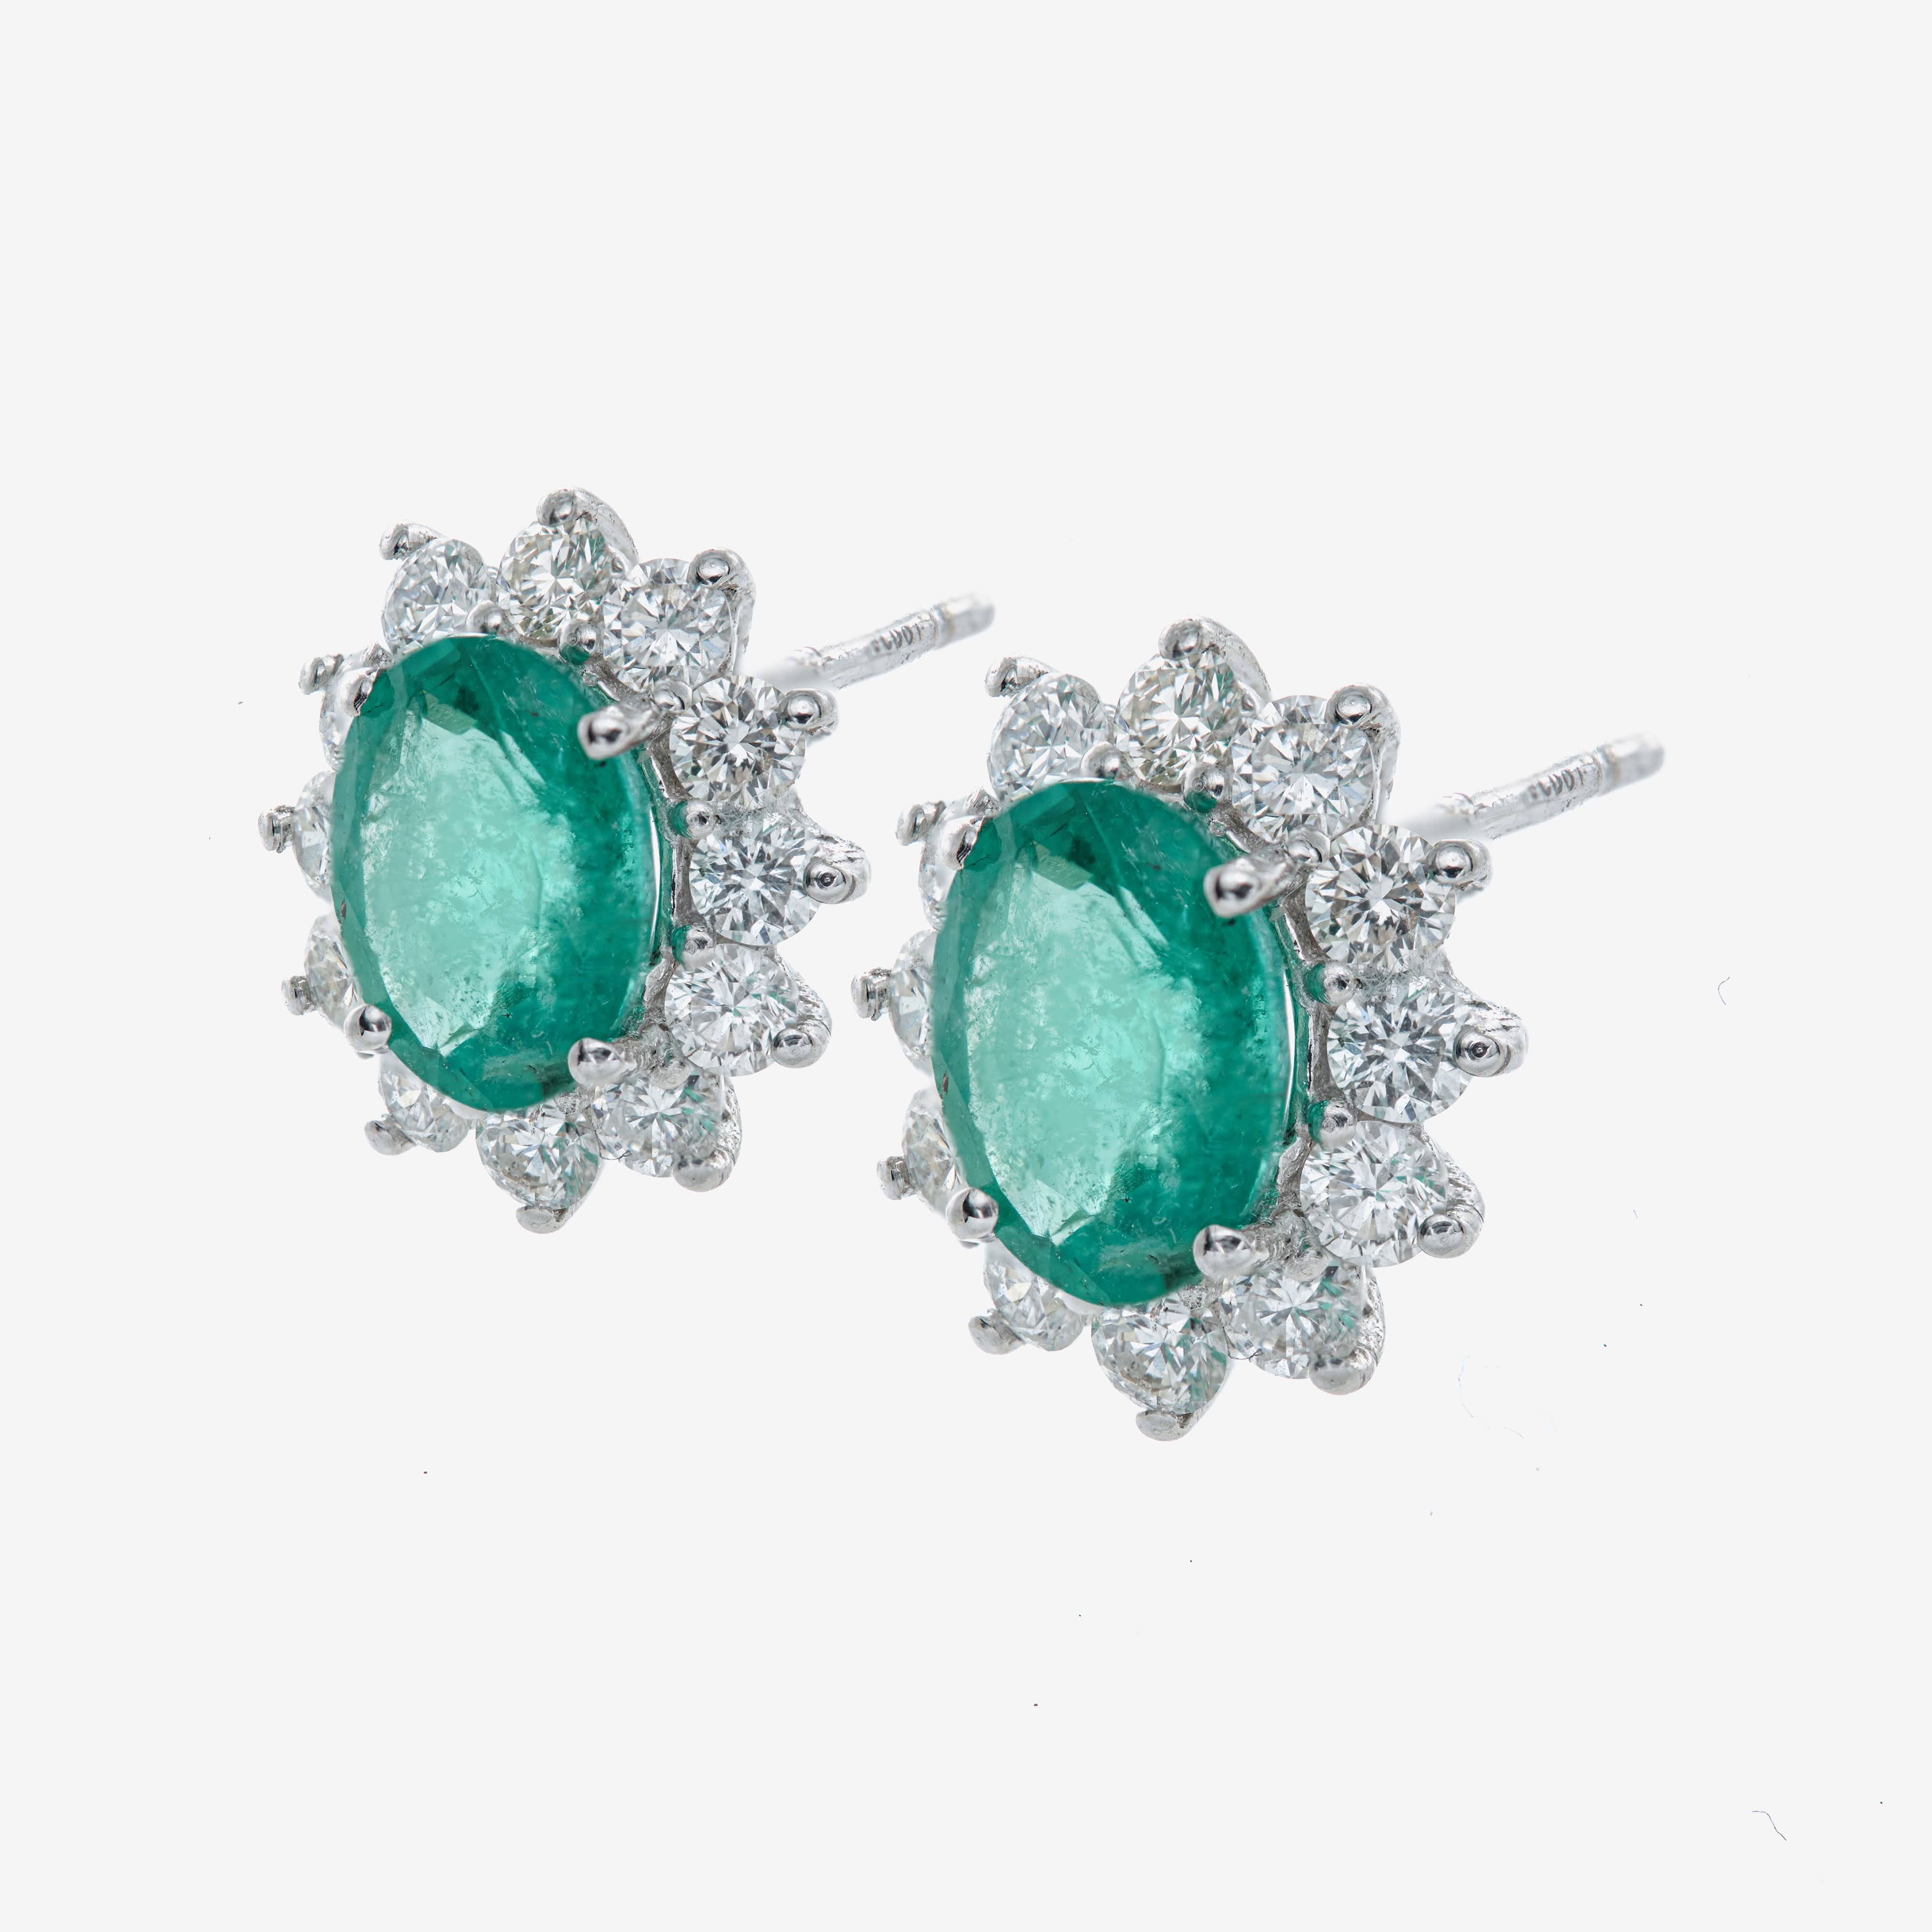 Lethia earrings with emeralds and diamonds